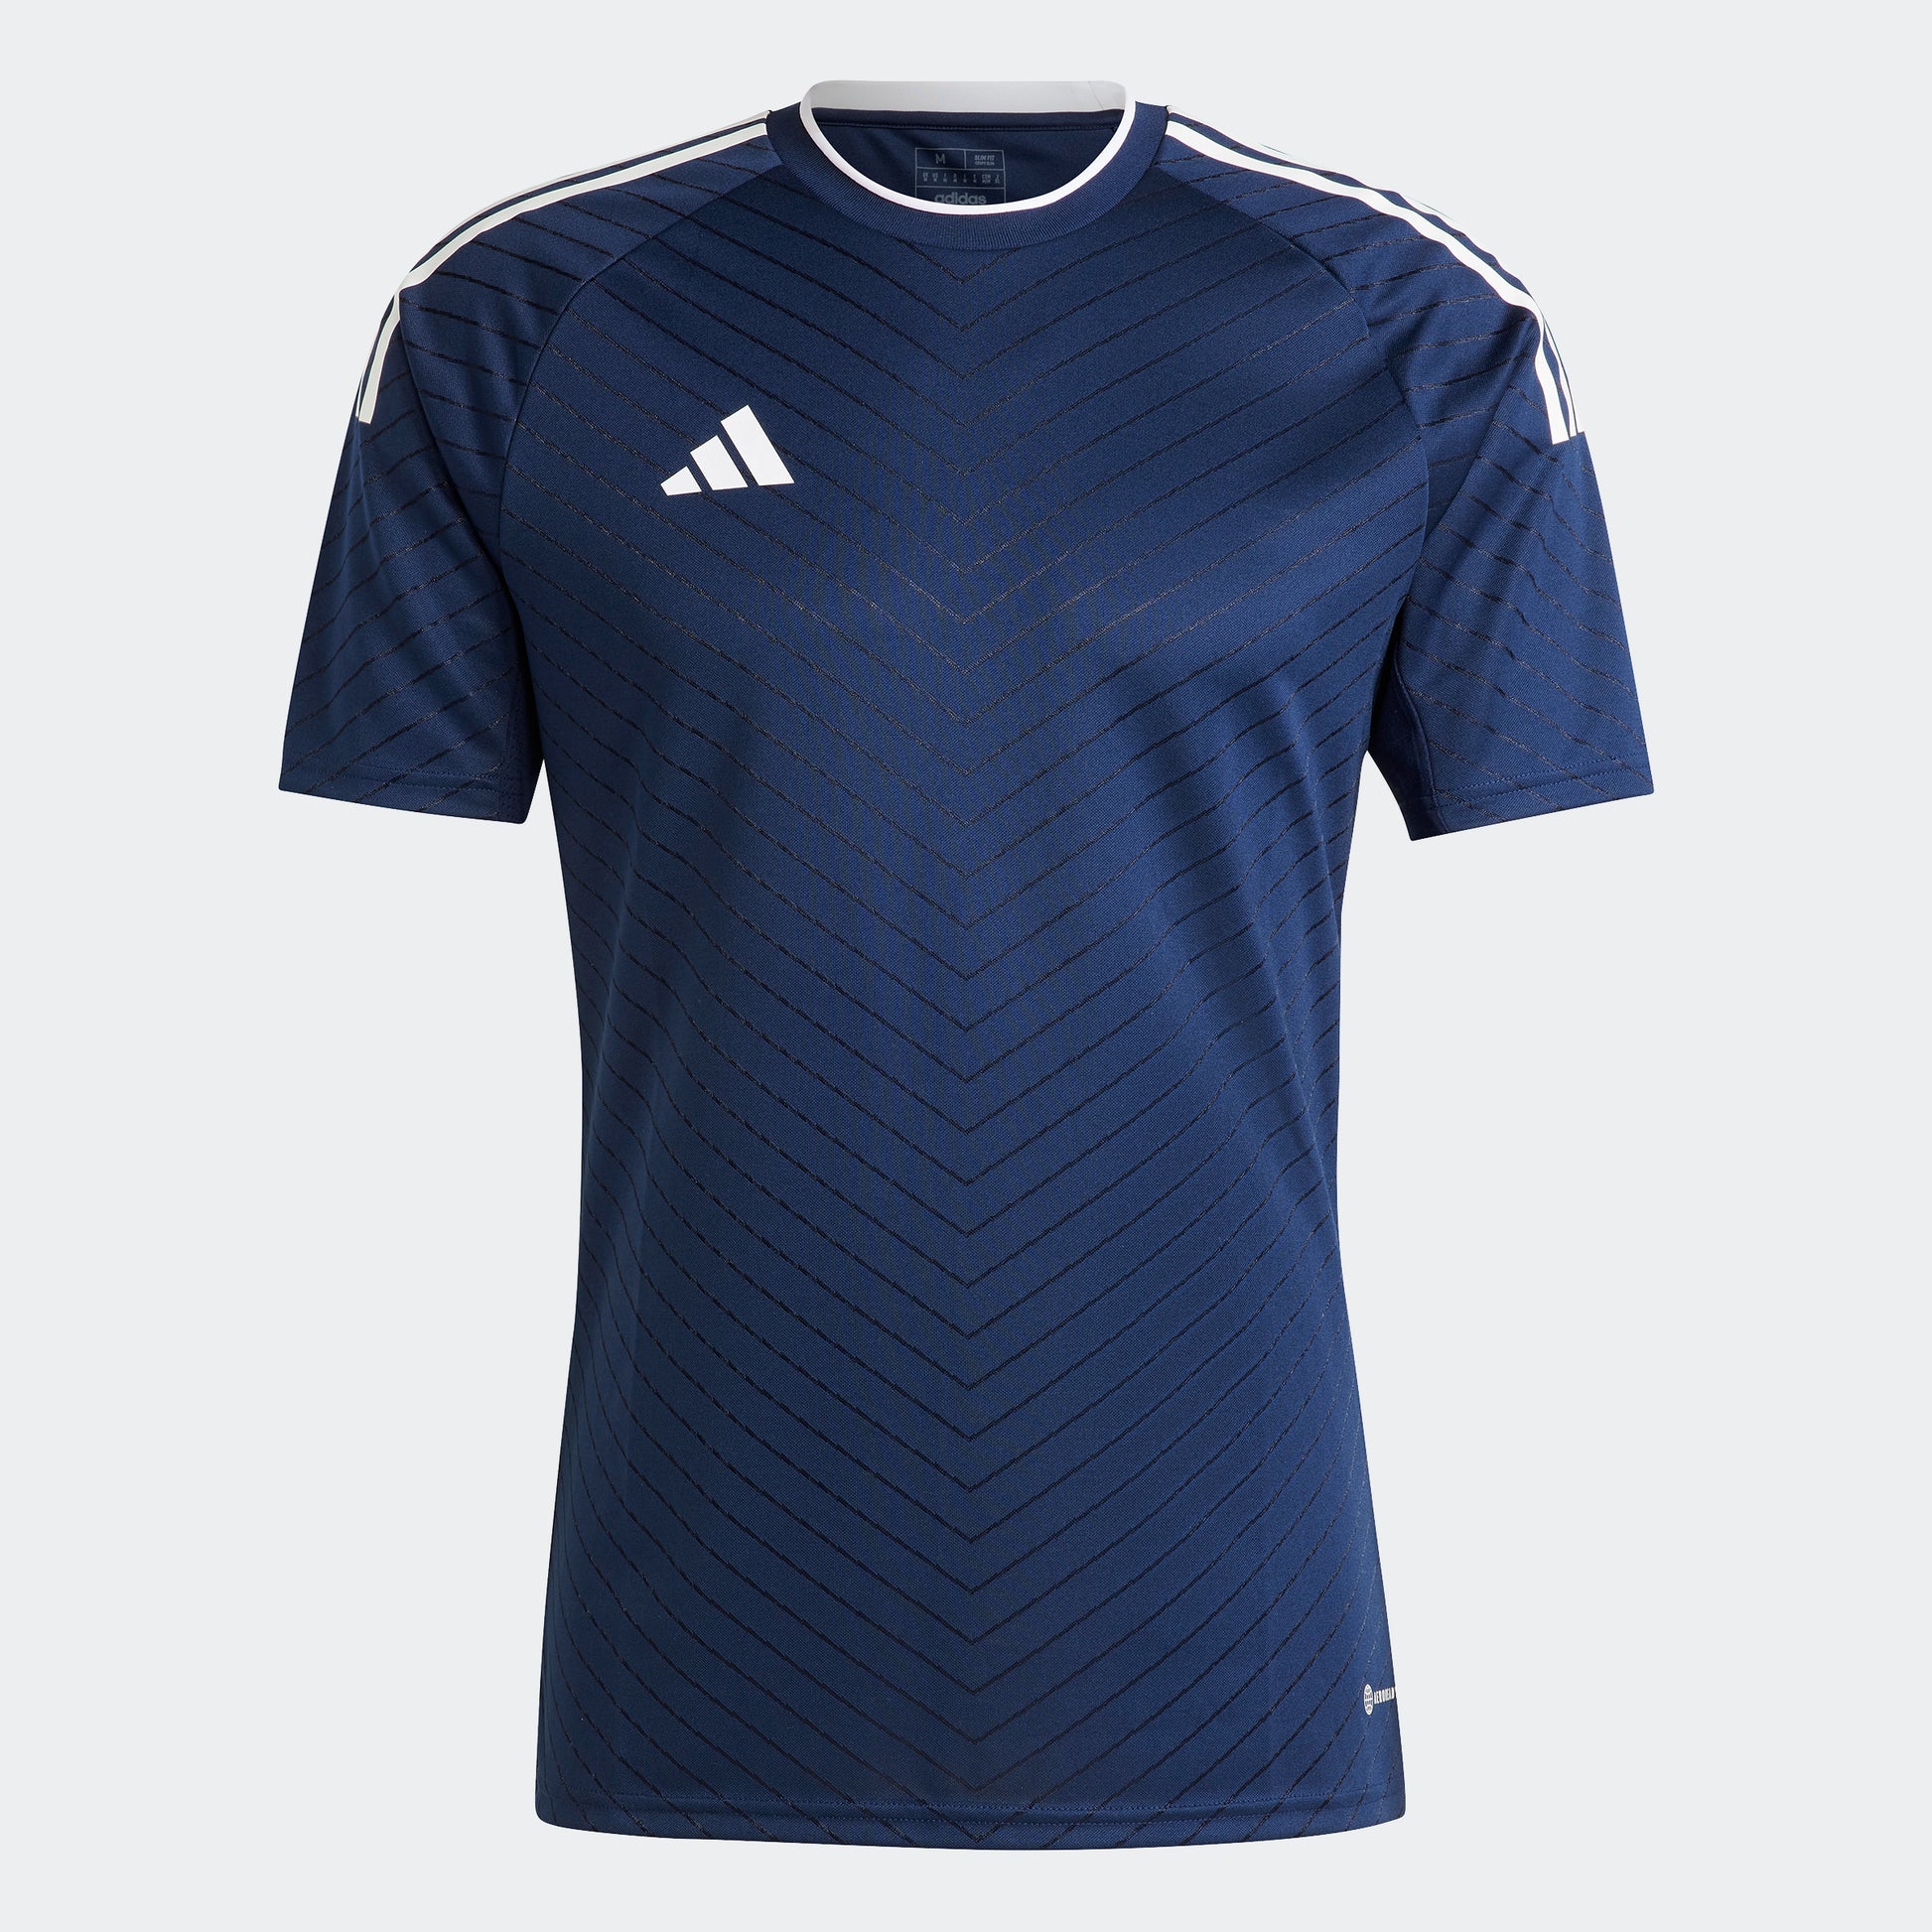 adidas Campeon 23 Jersey Team Navy Blue 2 (Front)